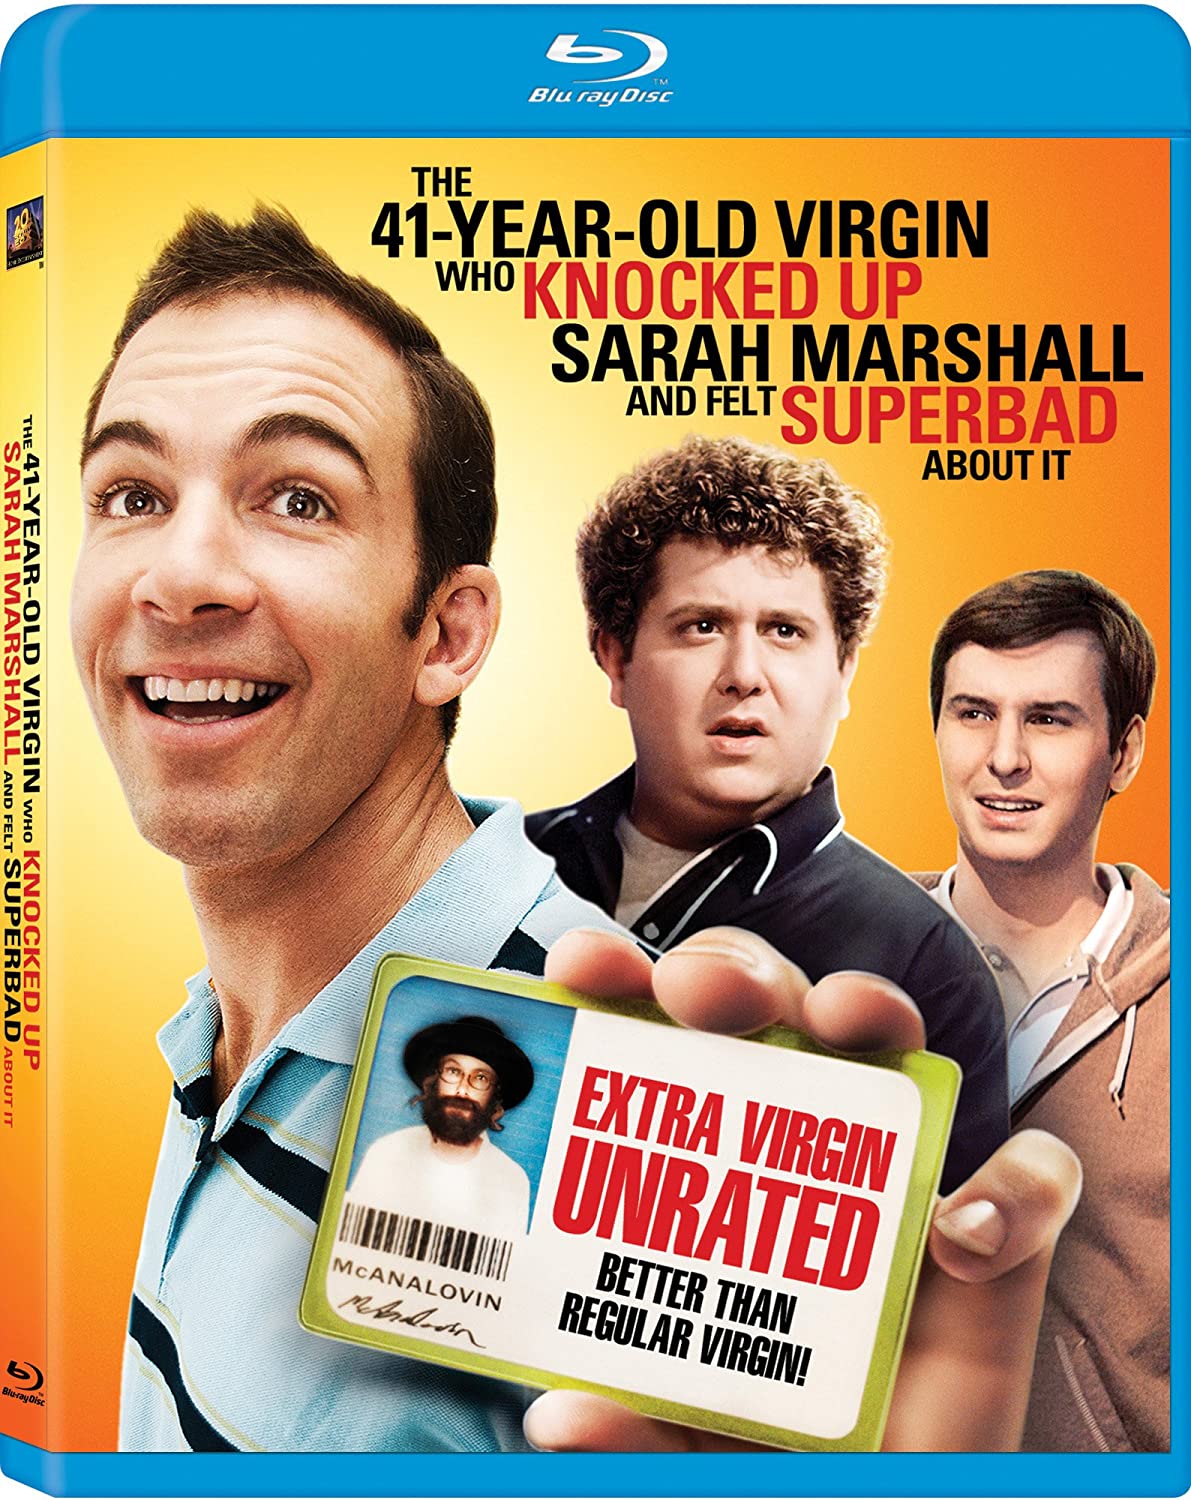 The 41 Year Old Virgin Who Knocked Up Sarah Marshall and Felt Superbad About It [Blu-ray] (Sous-titres français) [Blu-ray]